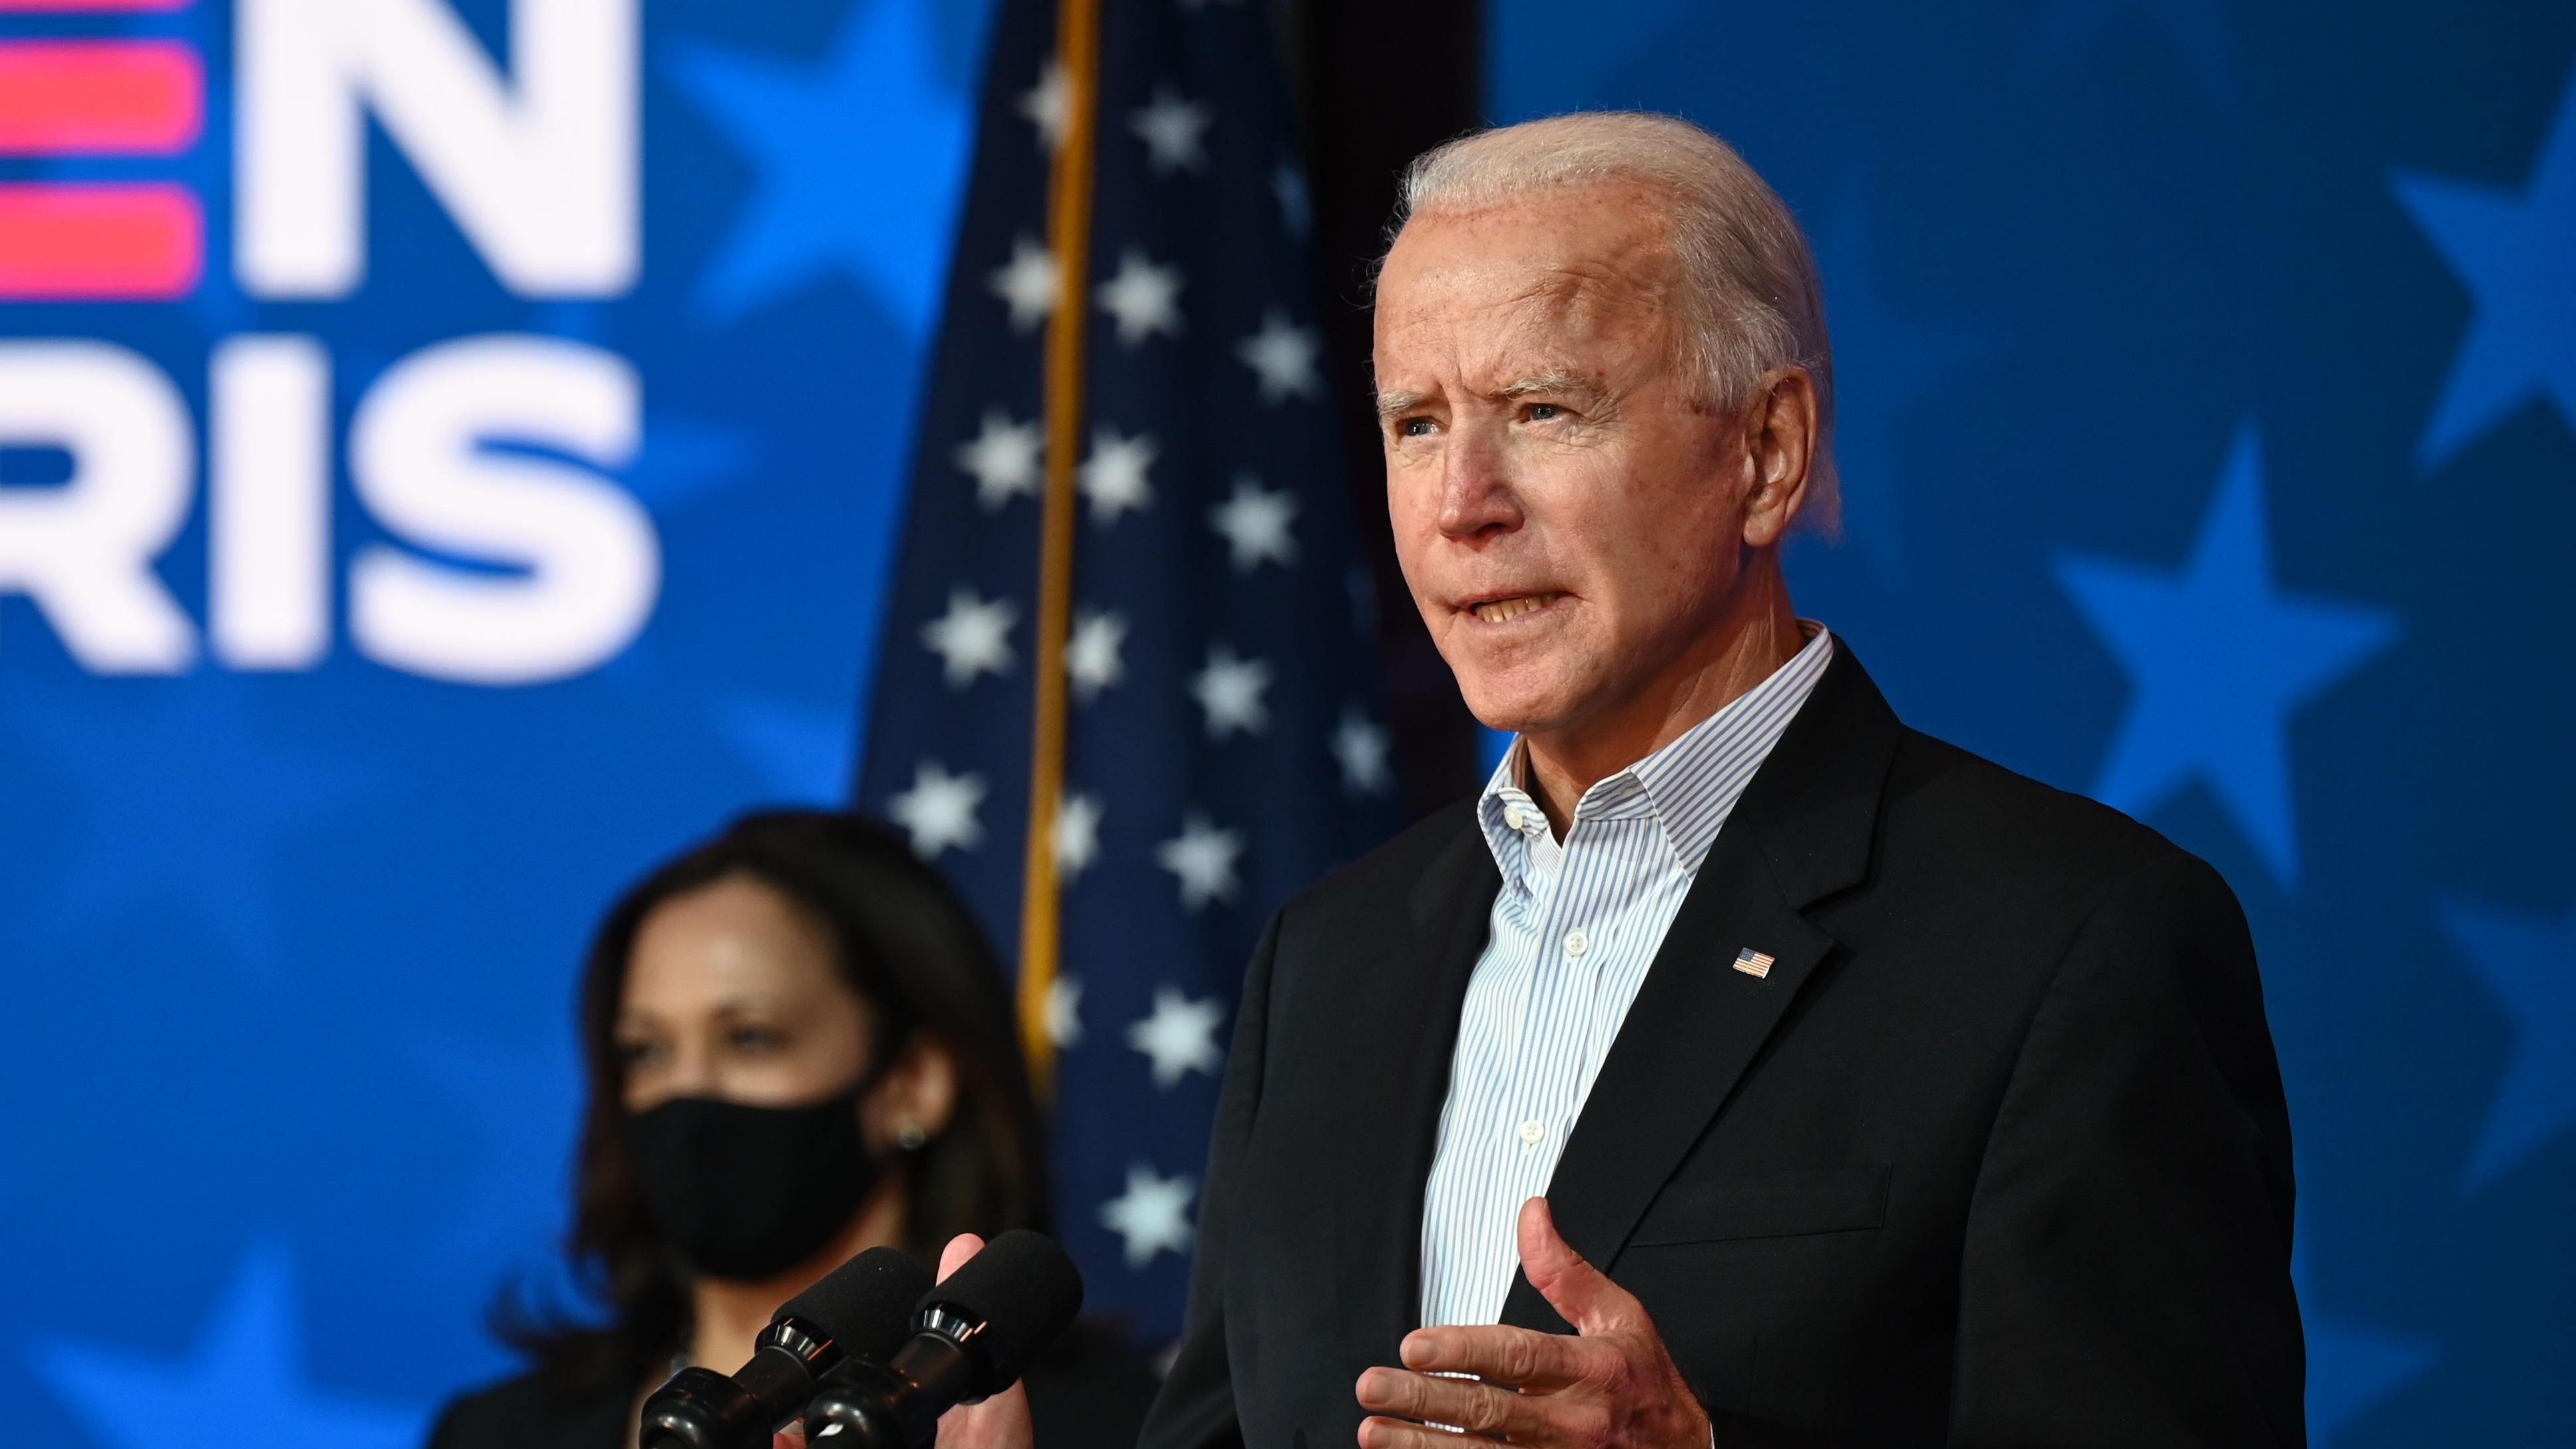 Then-Democratic candidate Joe Biden address supporters while votes were being counted across the US